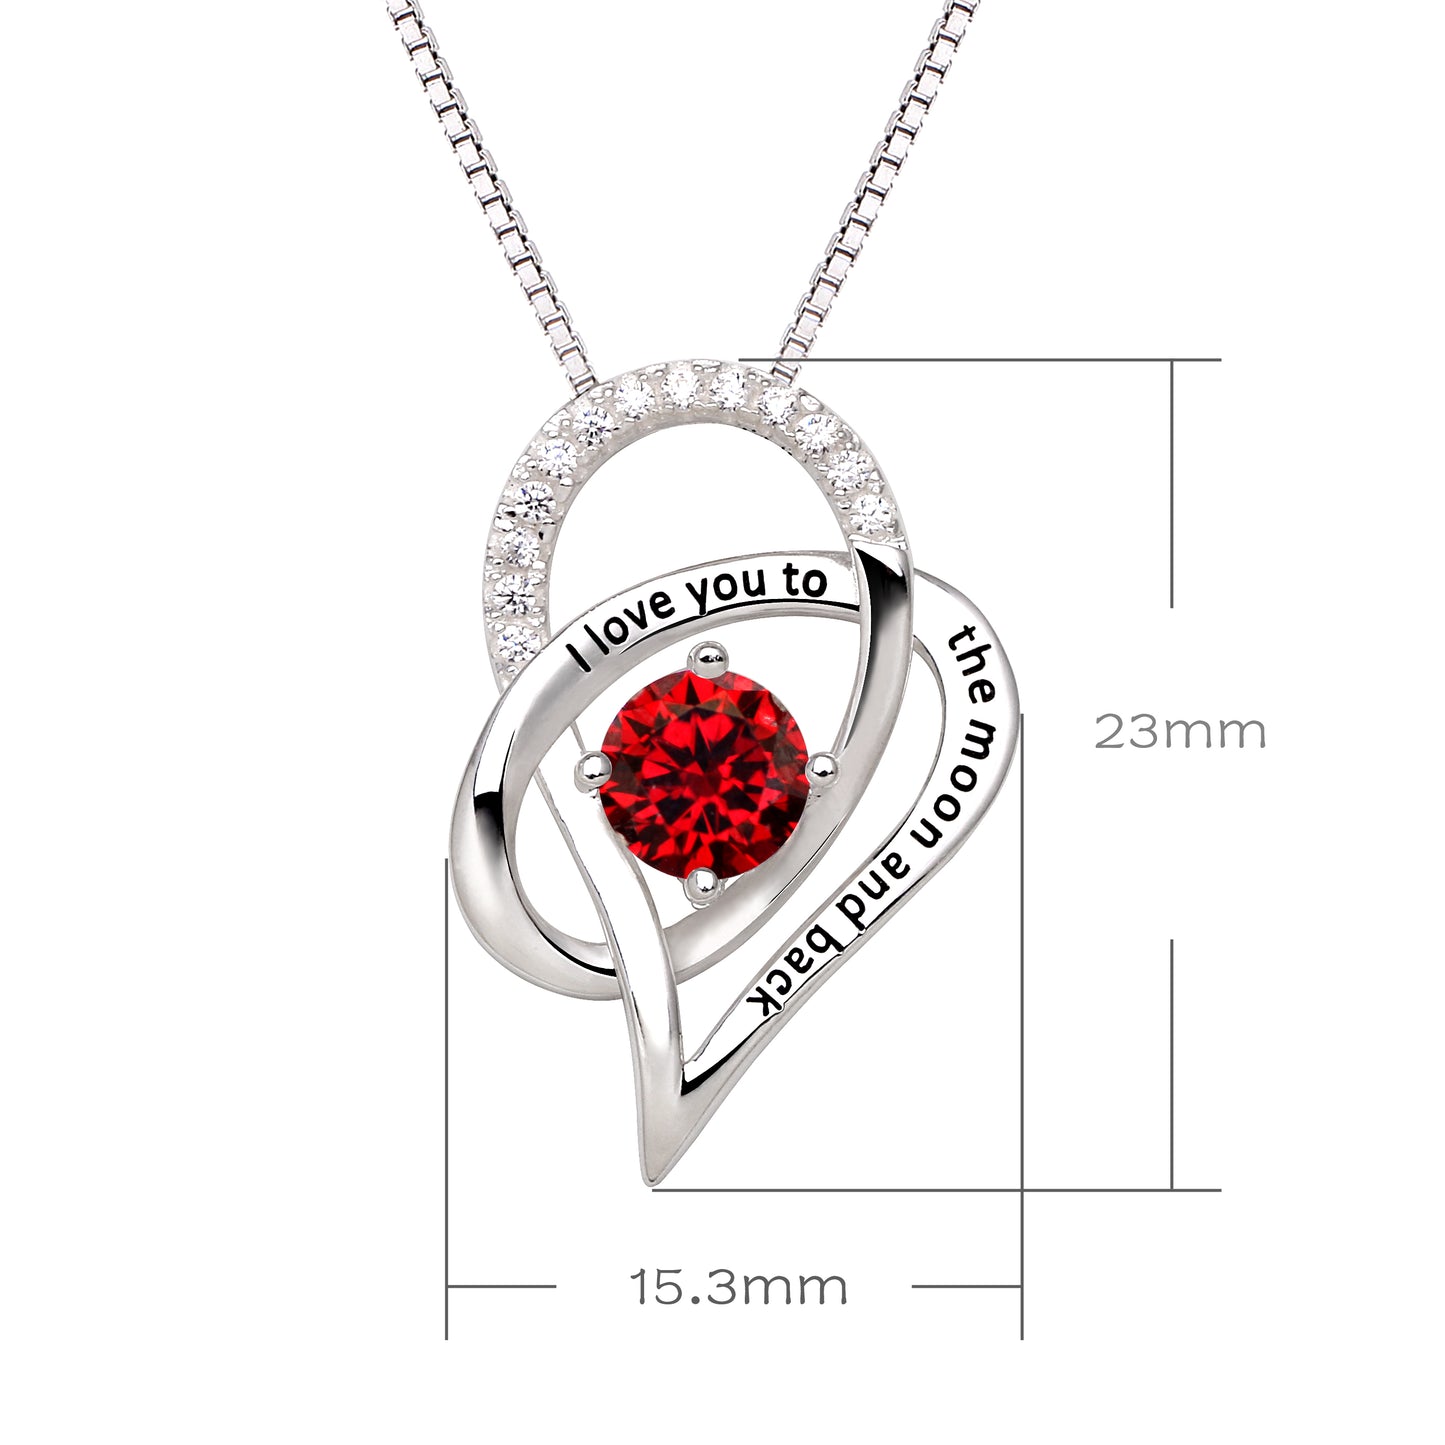 ALOV Jewelry Sterling Silver Birth Month "I Love You To The Moon and Back" Love Heart Cubic Zirconia Pendant Necklace